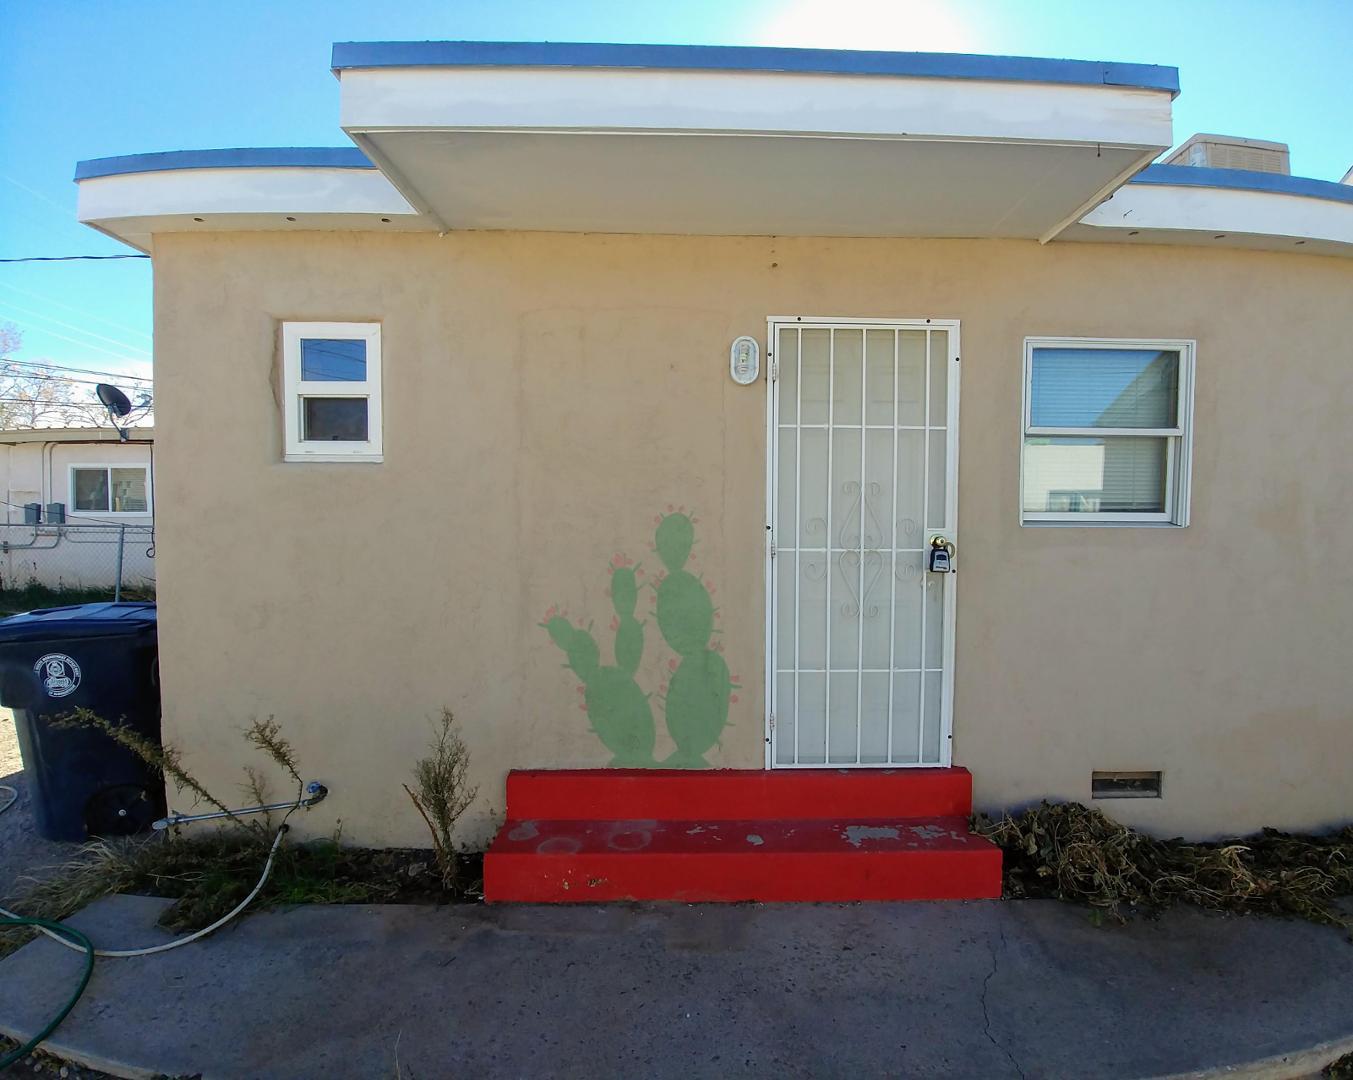 216 Princeton Drive SE Apt D, Albuquerque, New Mexico 87106, ,1 BathroomBathrooms,Residential Lease,For Rent,216 Princeton Drive SE Apt D,1061189